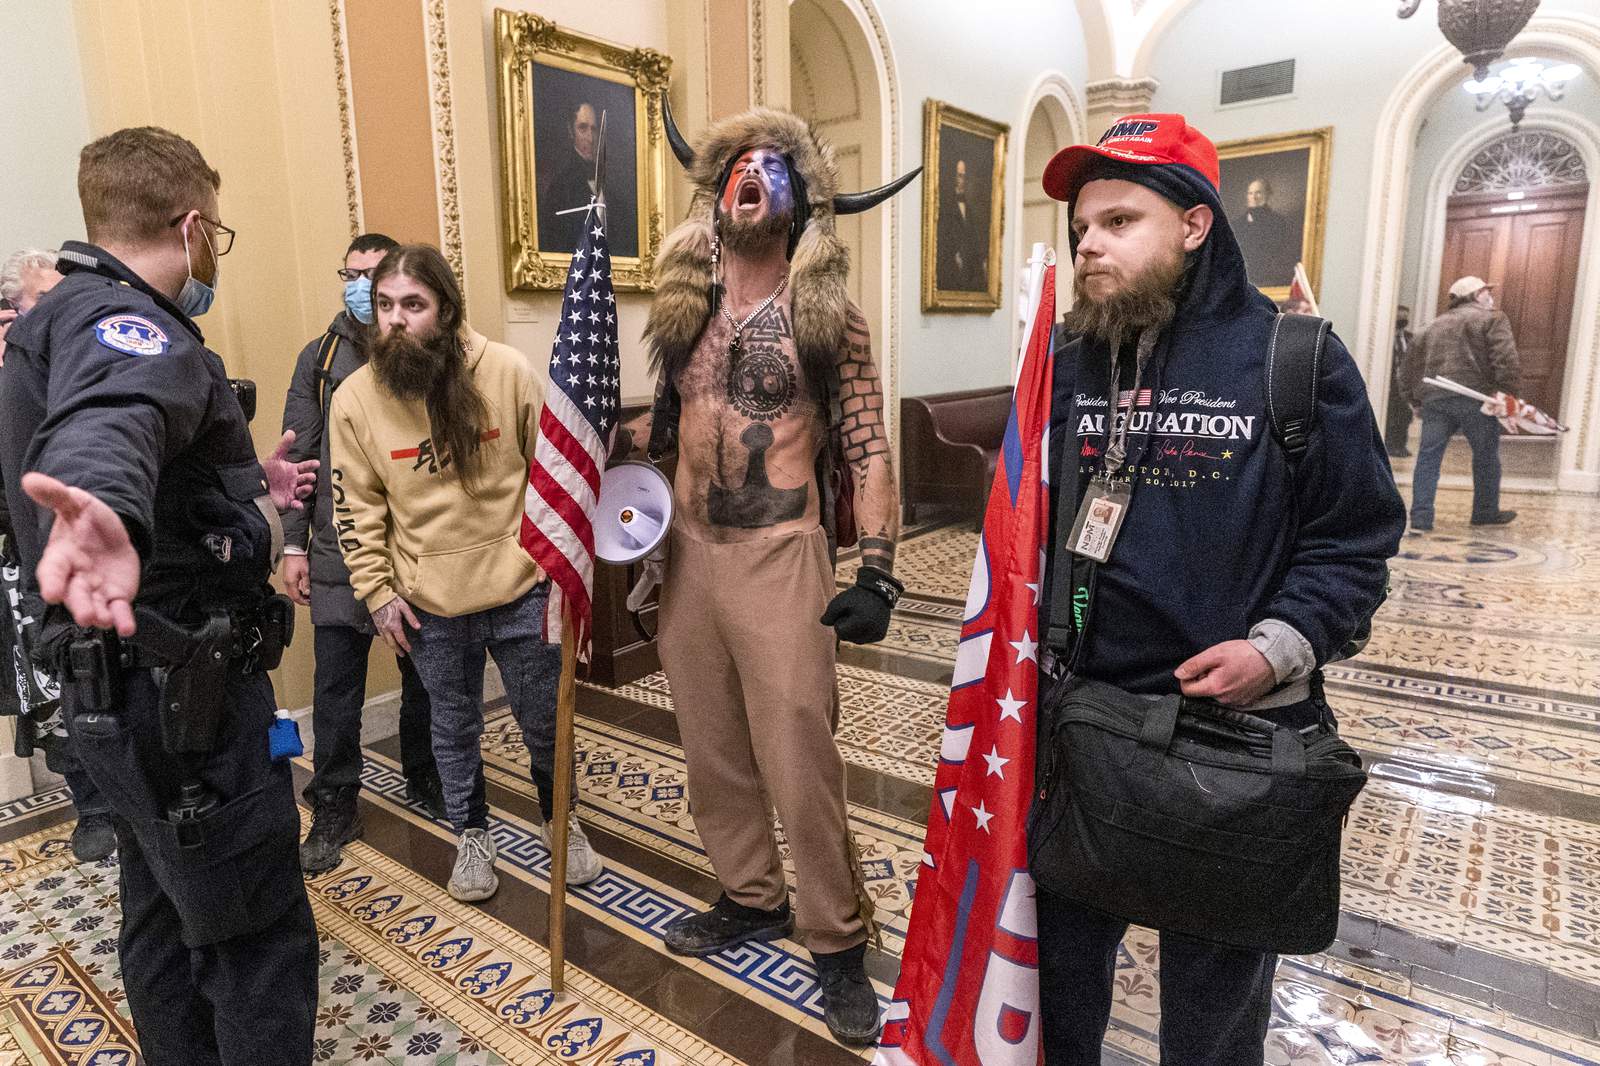 Man who wore horns at US Capitol to get organic food in jail